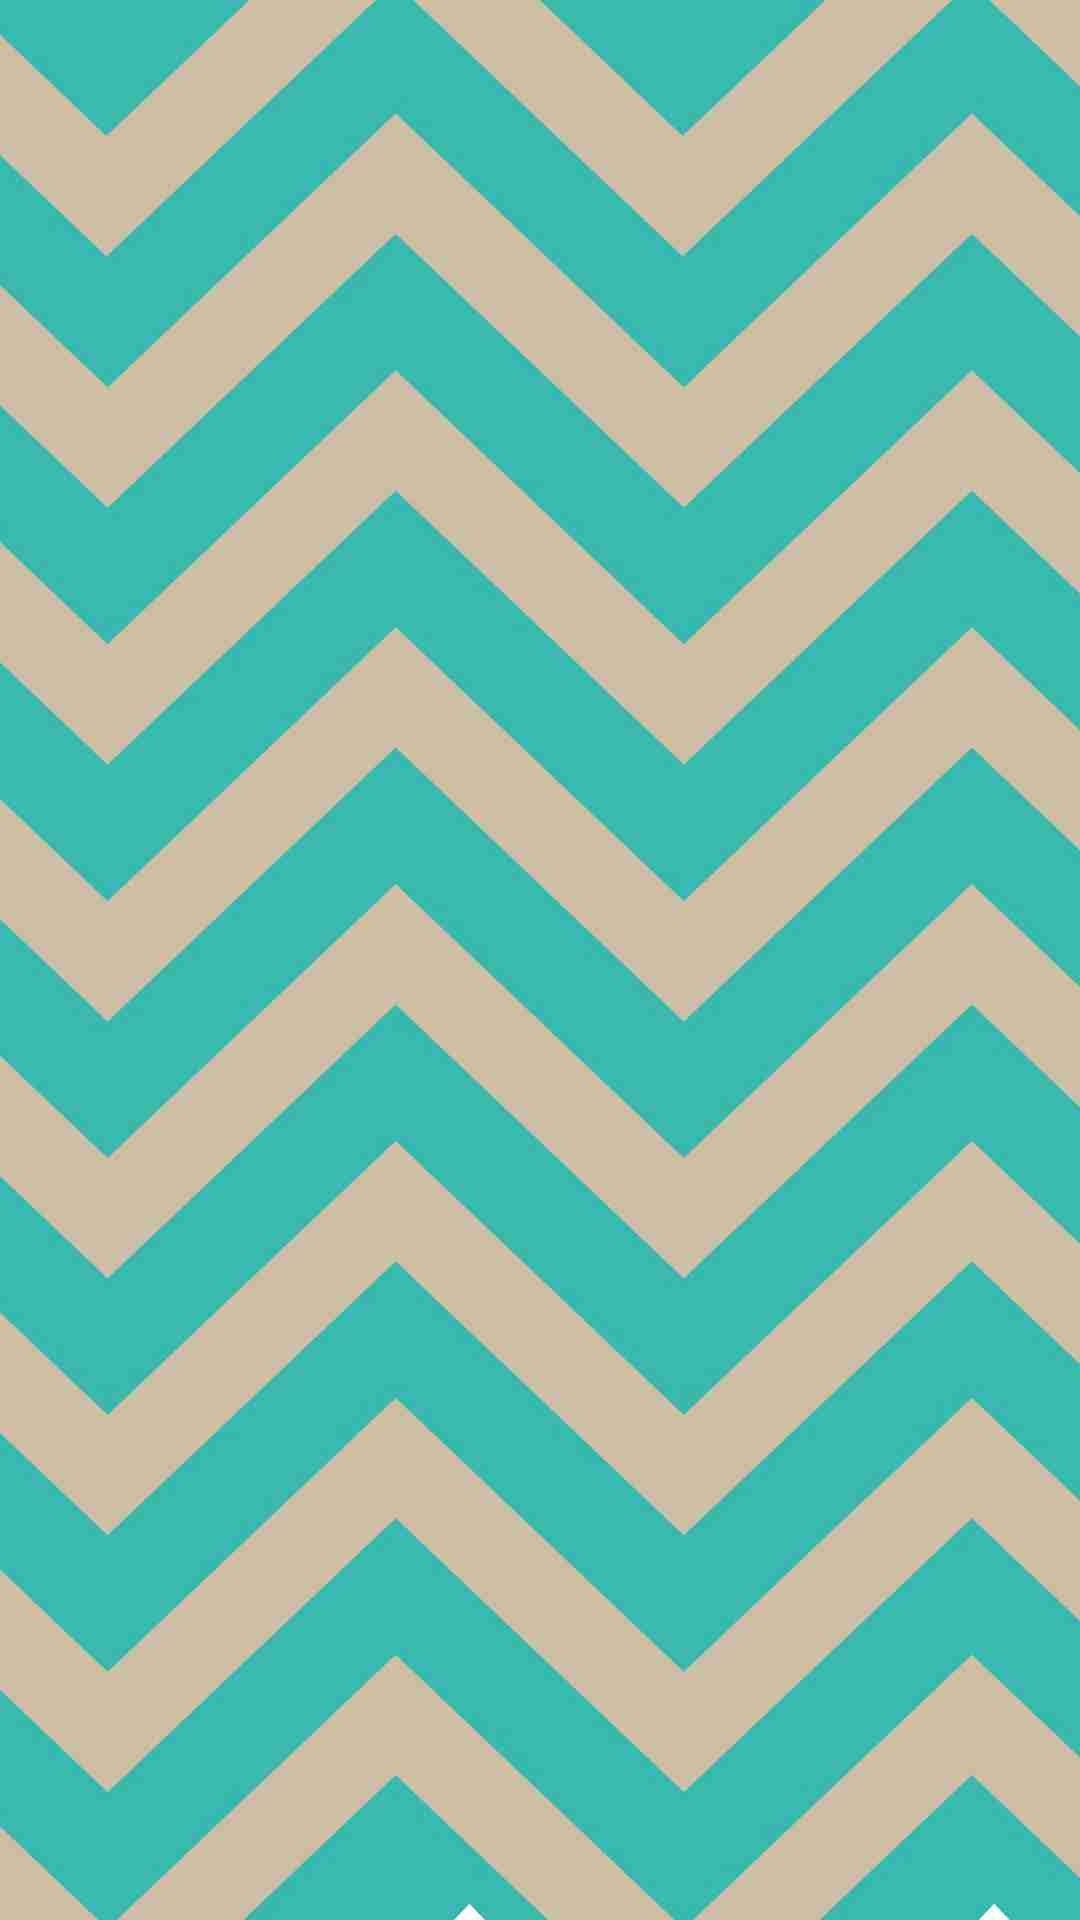 1080x1920 Amazing Tiffany Blue Chevron Wallpaper With The Letter S Excellent Home  Design Cool And Tiffany Blue